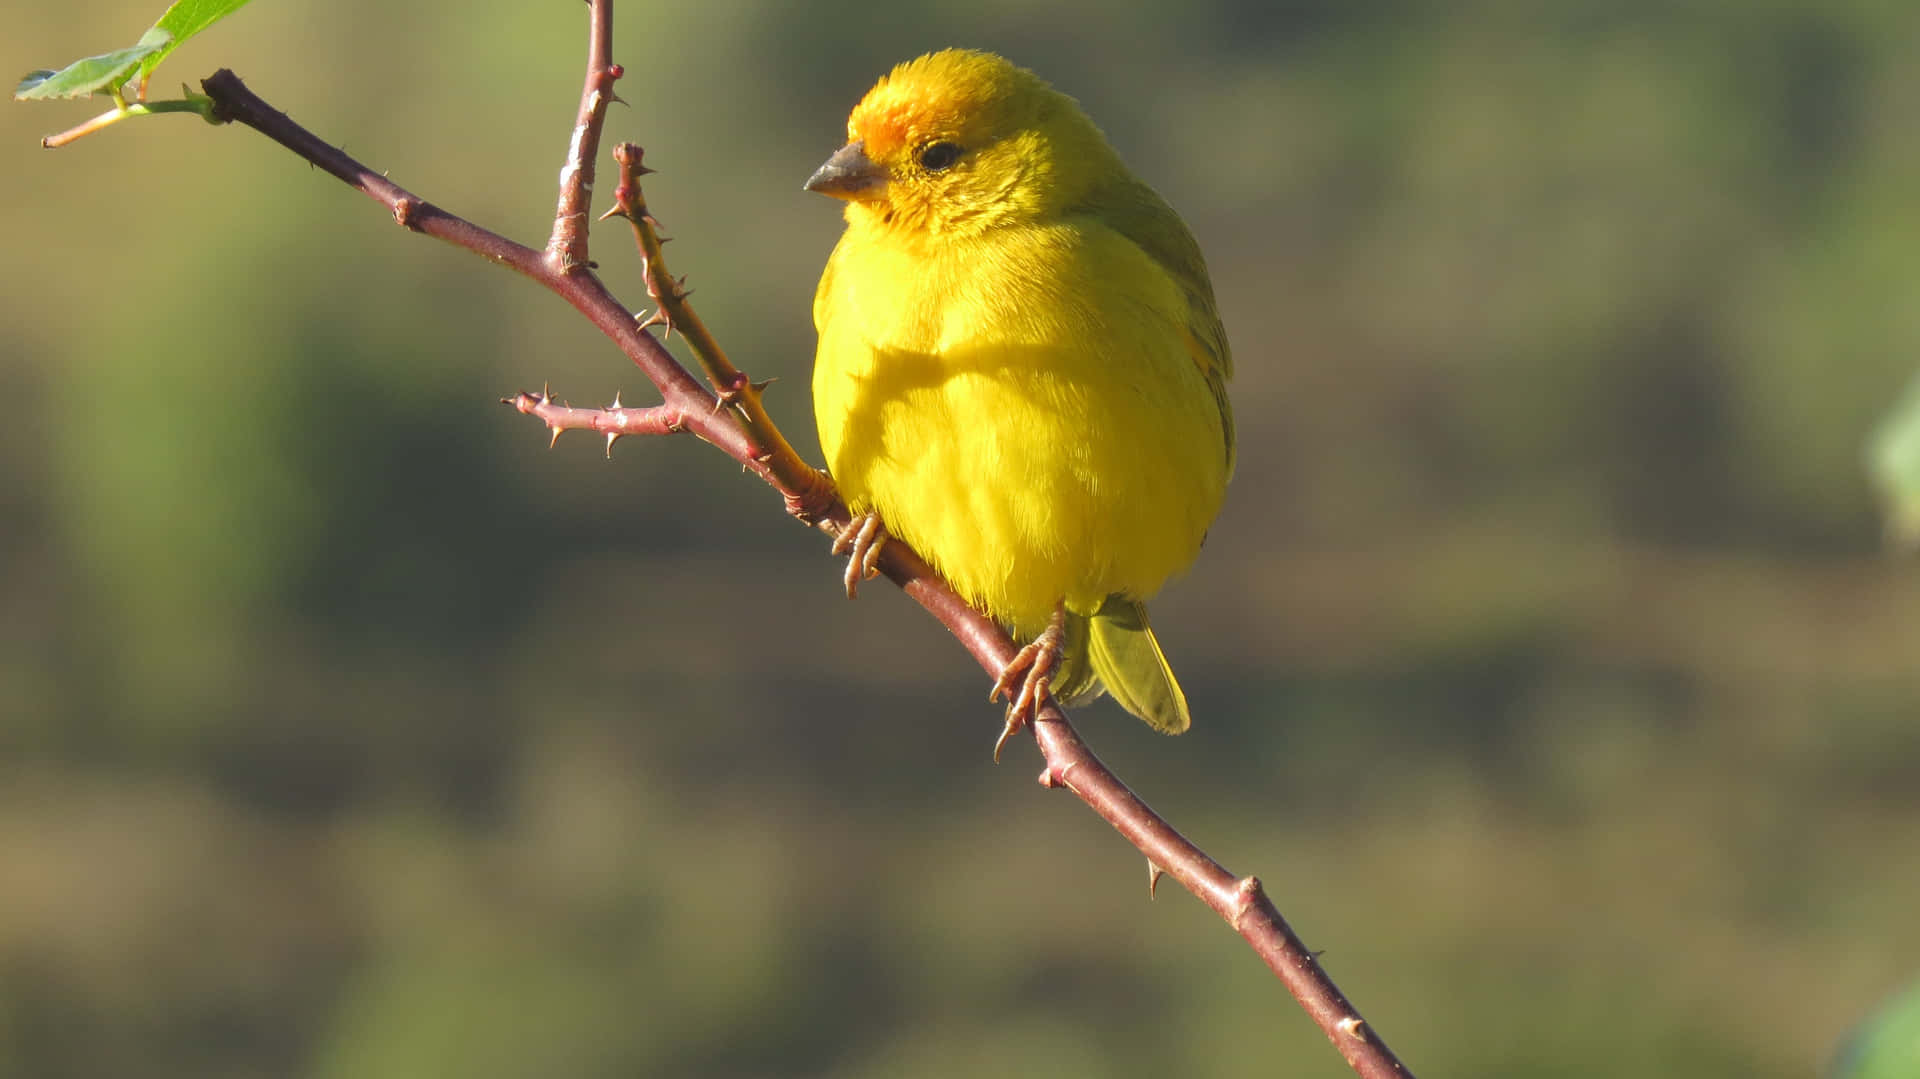 Vibrant Yellow Canary Perched on a Branch Wallpaper